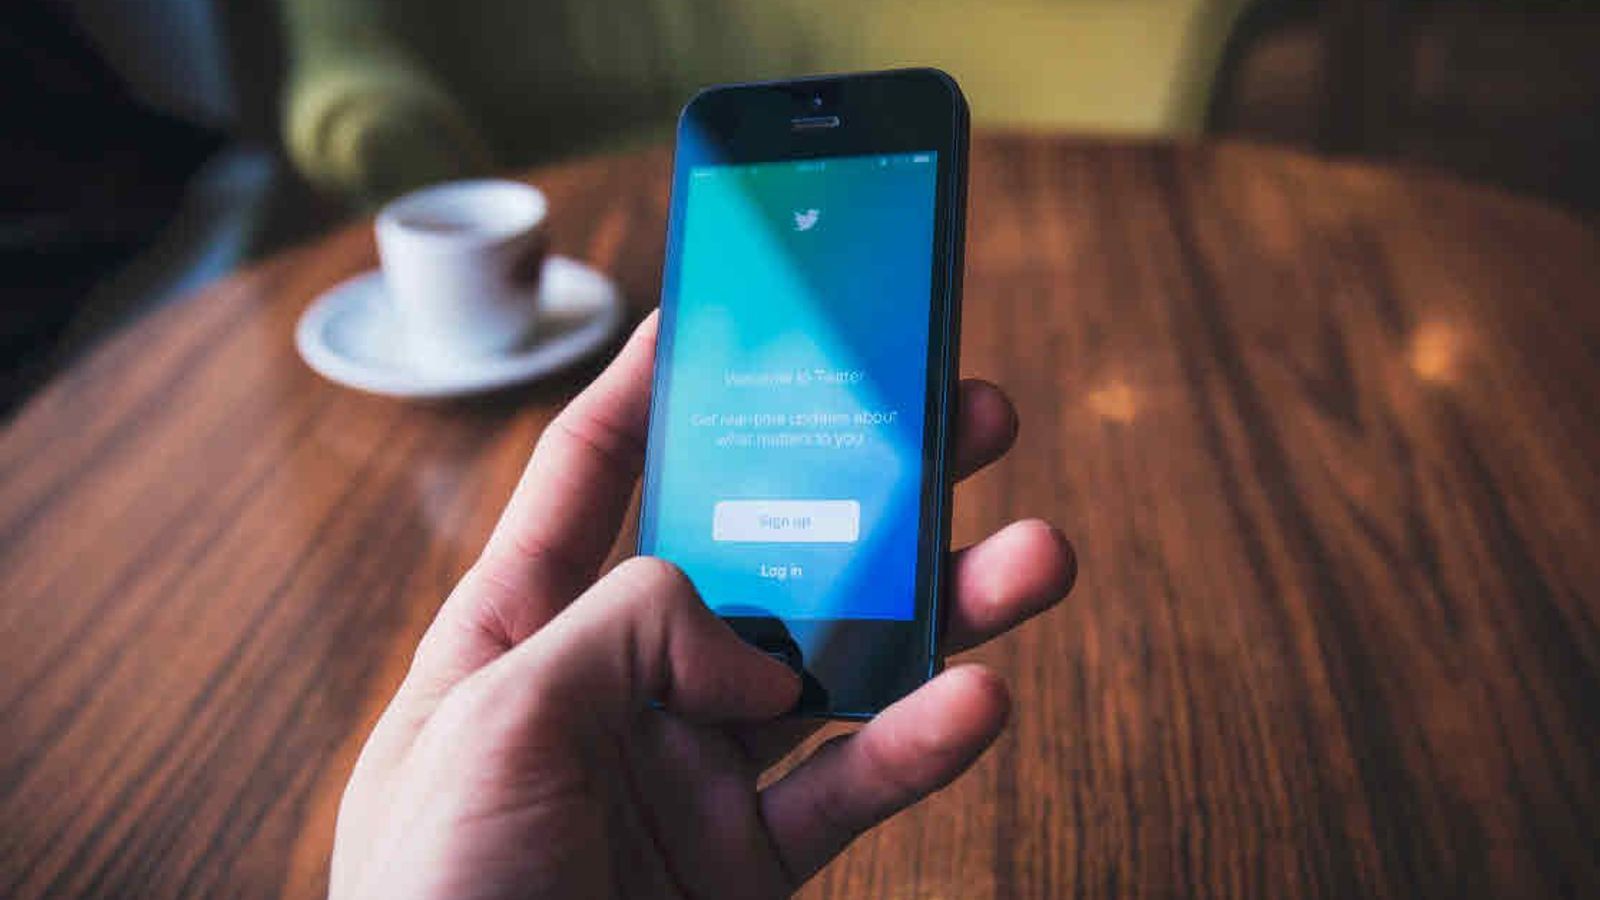 Twitter Talk: One Small Work Change To Improve Talent Experience